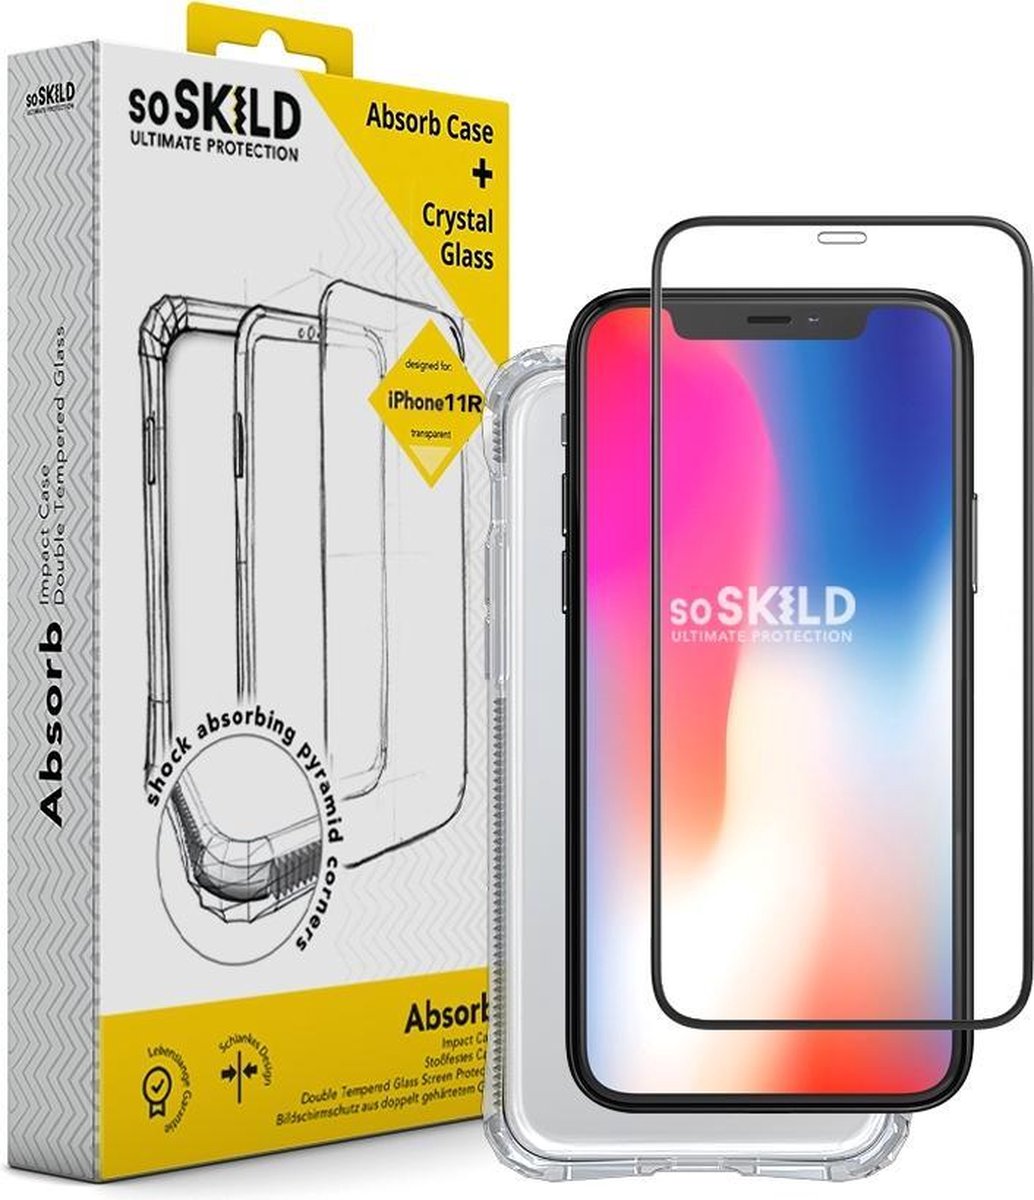 SoSkild iPhone 11 Pro Absorb Impact Case Slightly Grey and Tempered Glass